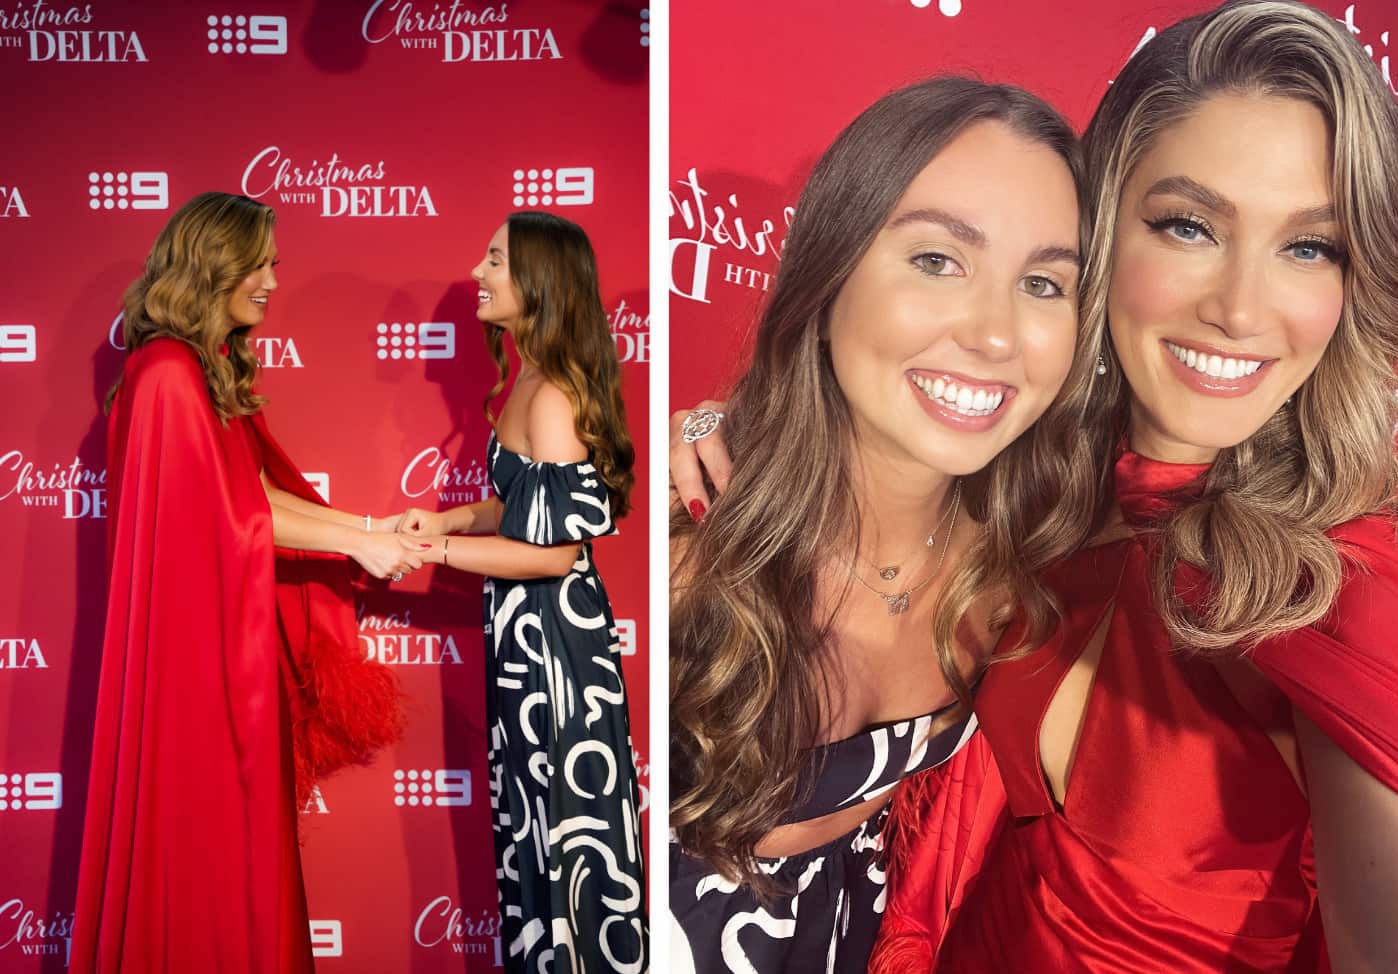 Molly meeting Delta Goodrem on the red carpet